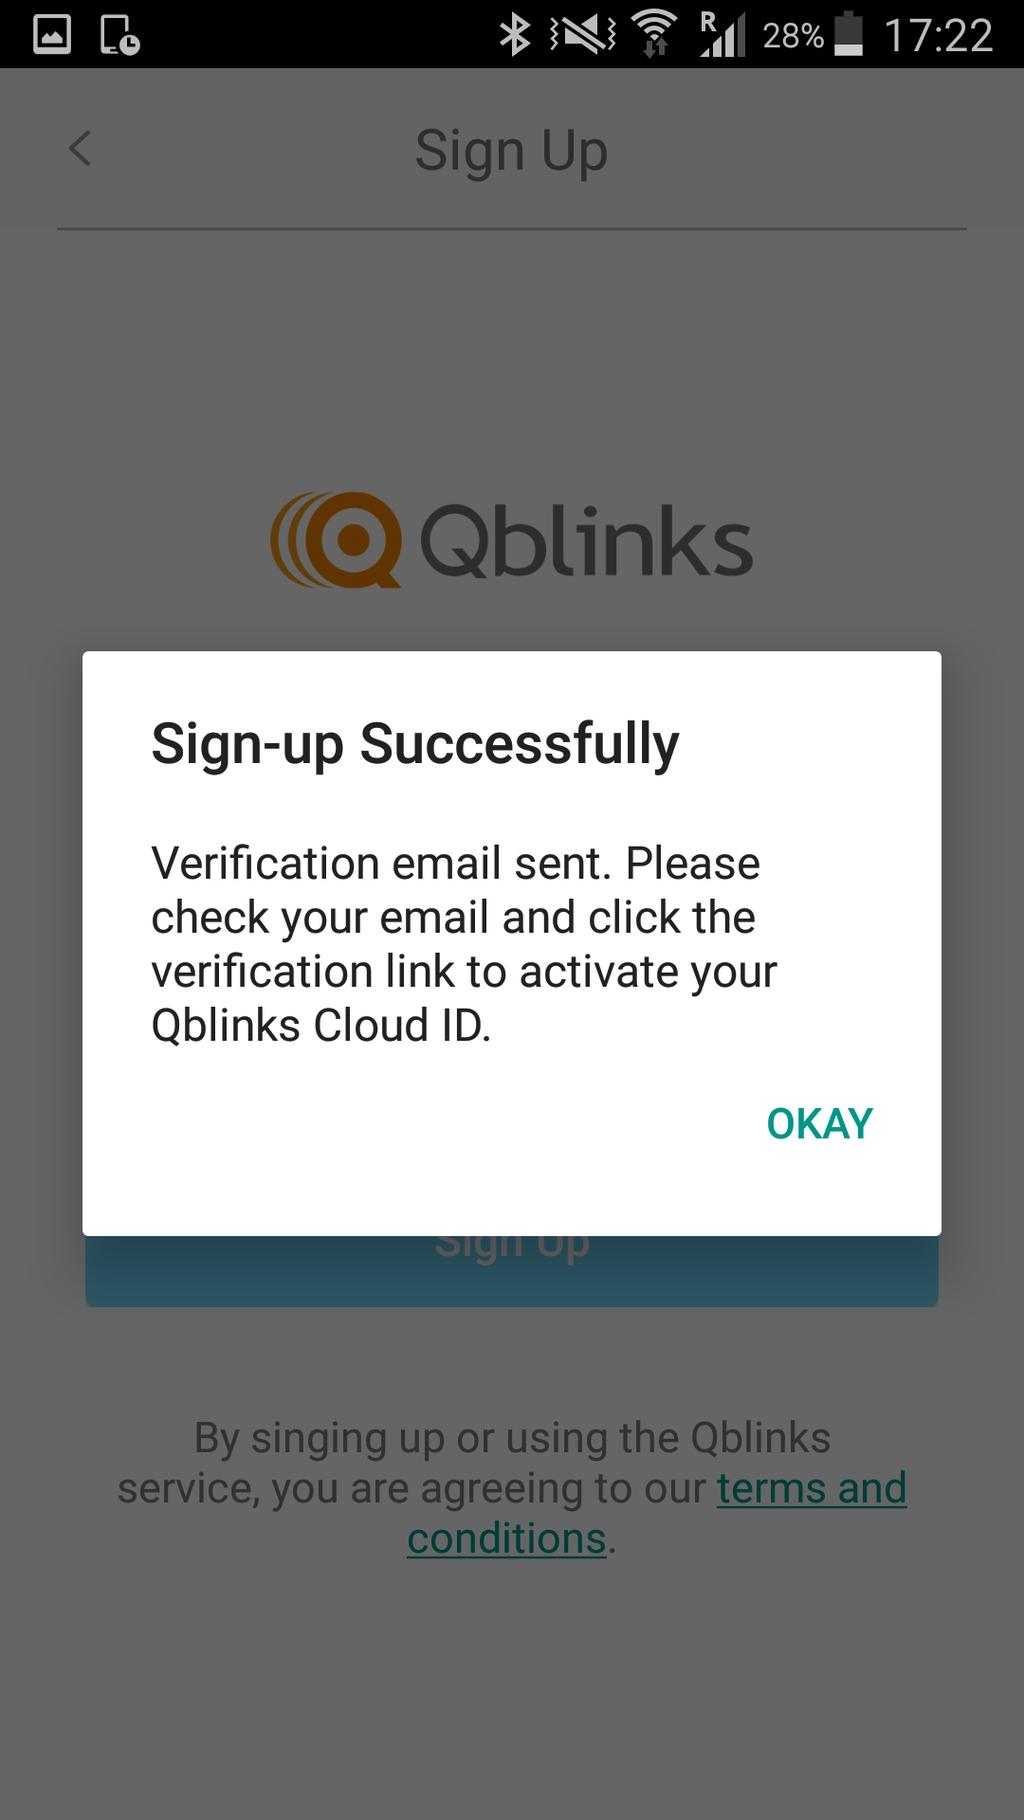 Check your email inbox and activate your Qblinks Cloud